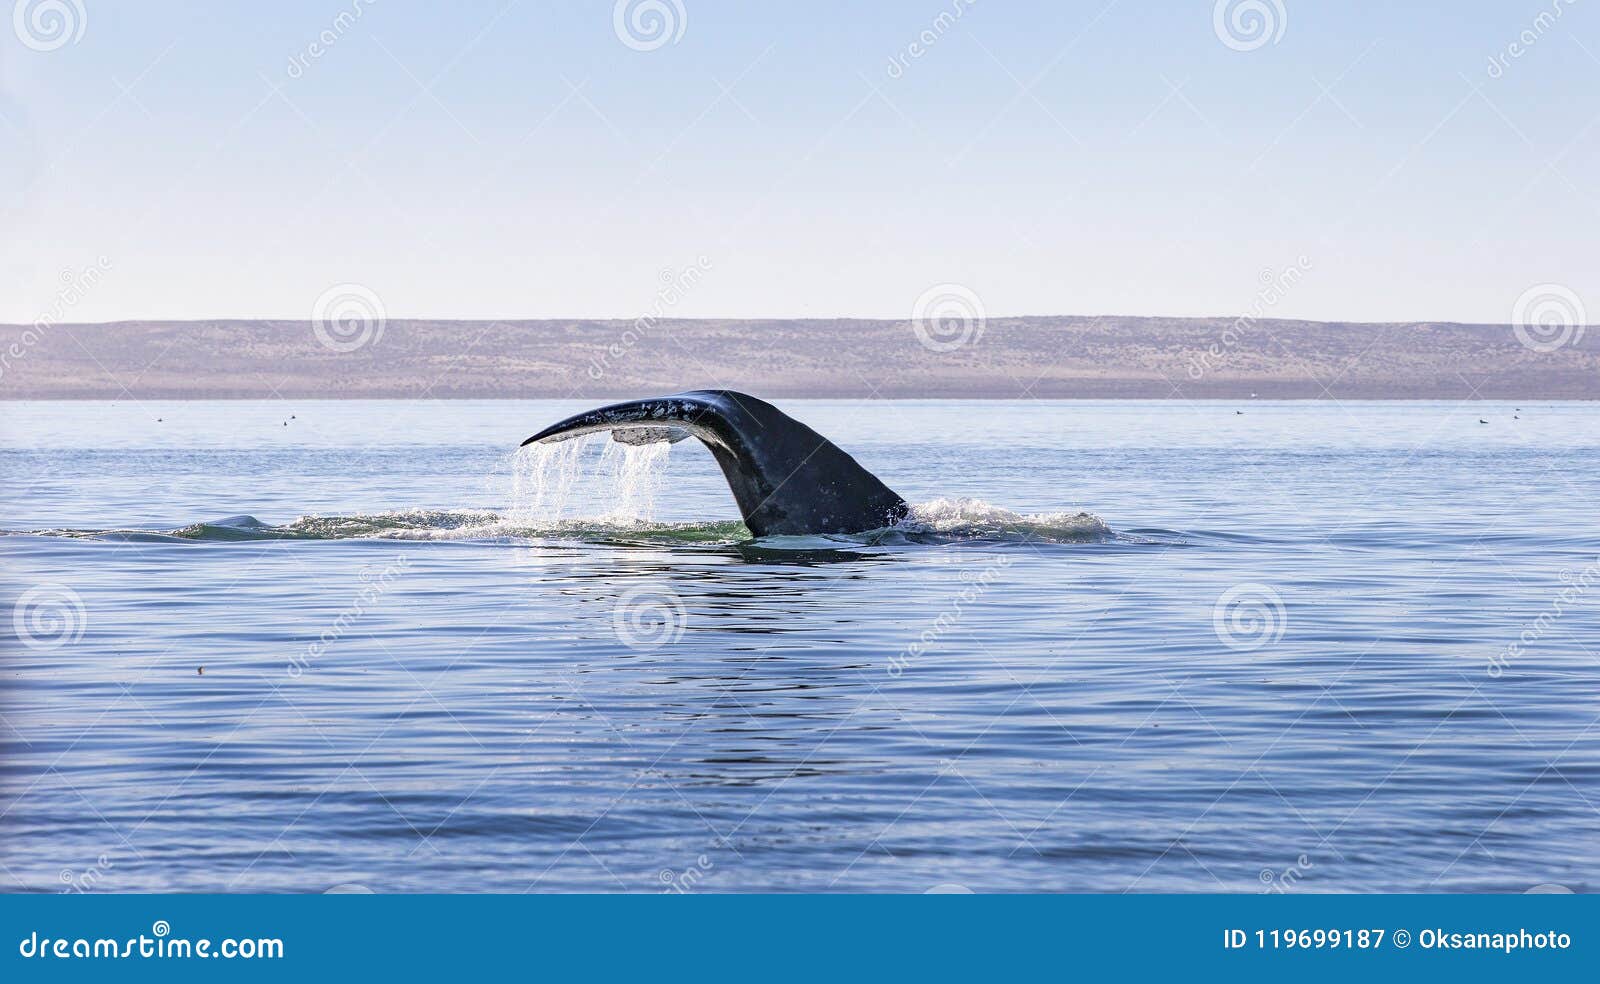 whale watching in baja